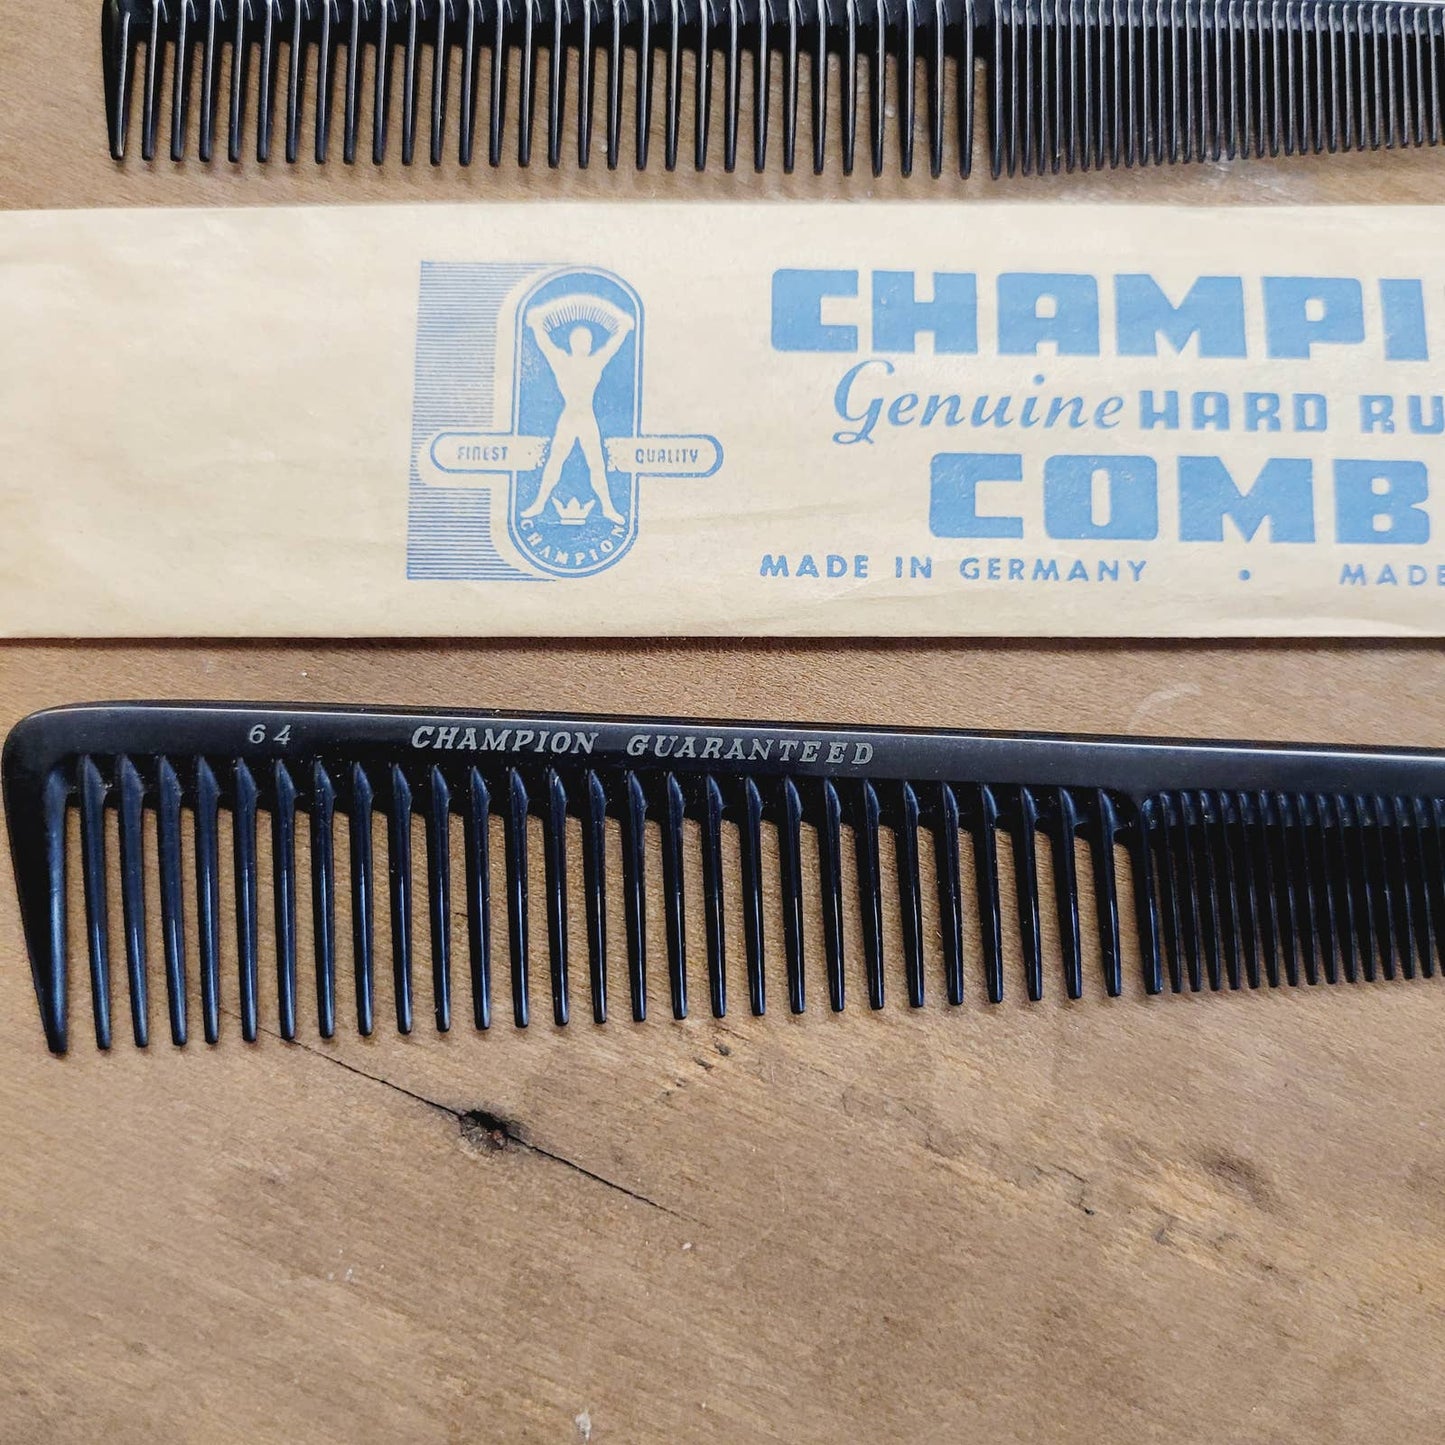 Champion Hard Rubber Comb #64 & #72. In Original Paper Sleeve, Made In Germany